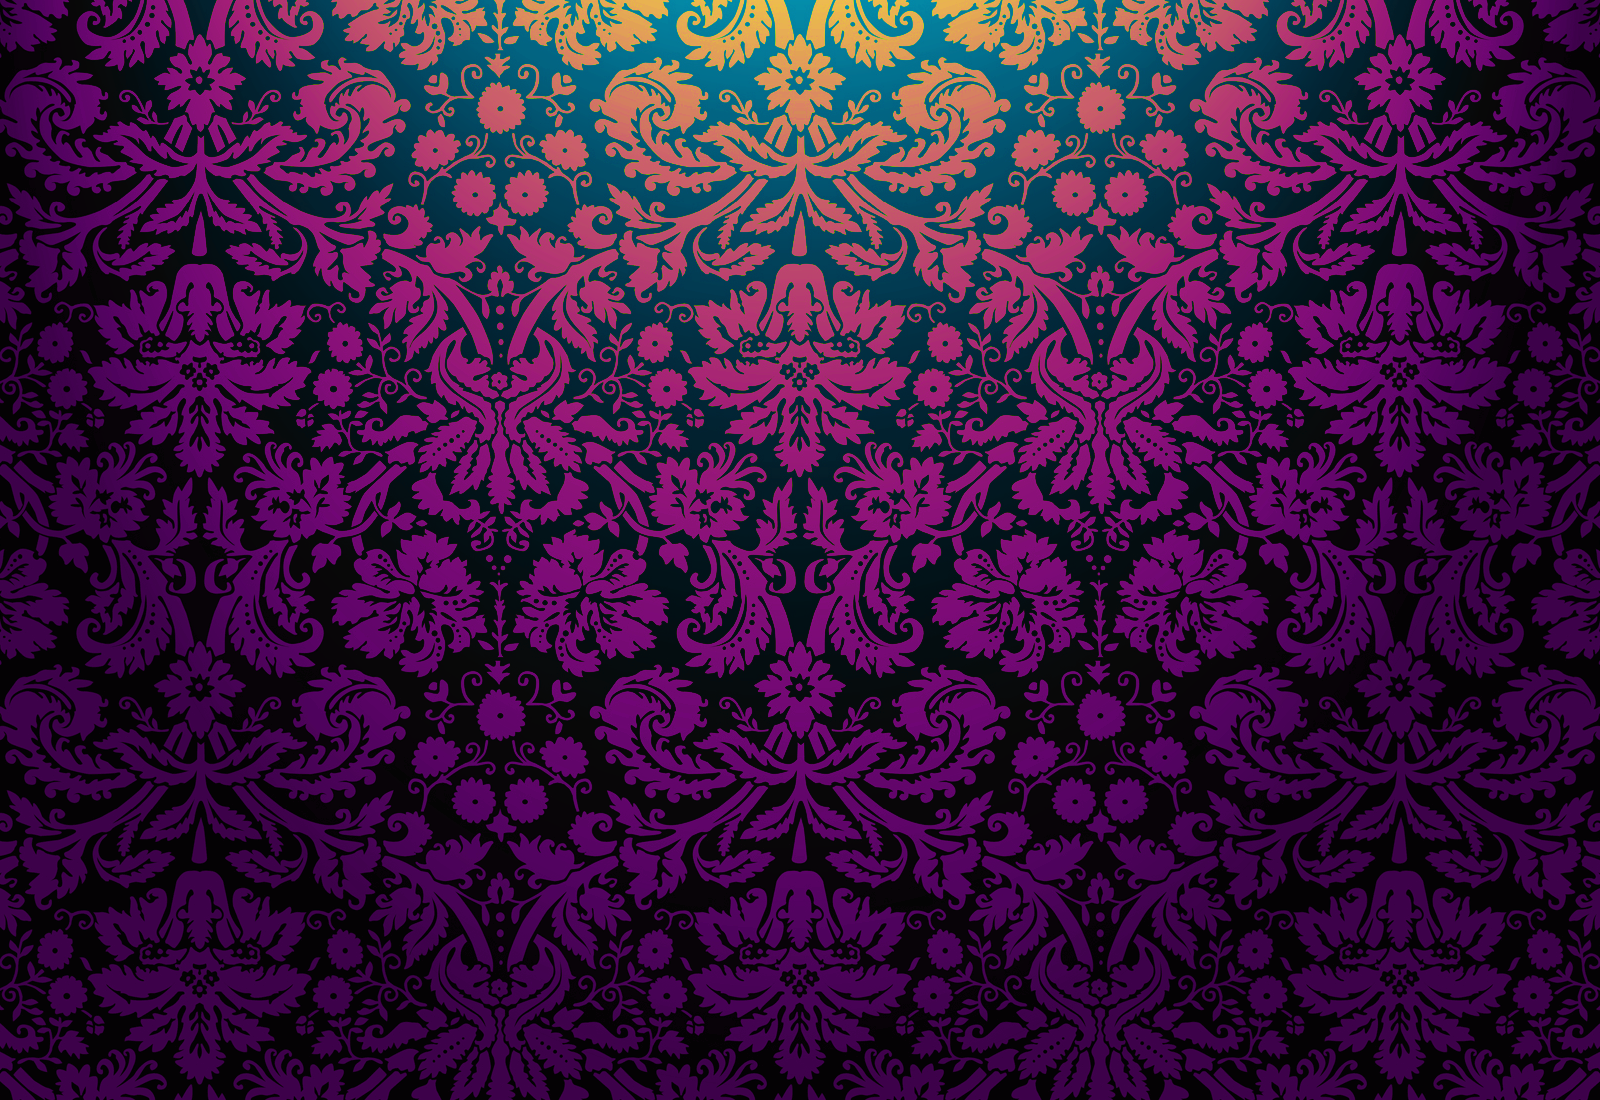 Floral Damask By Mia77 Black Background And Some Ppt